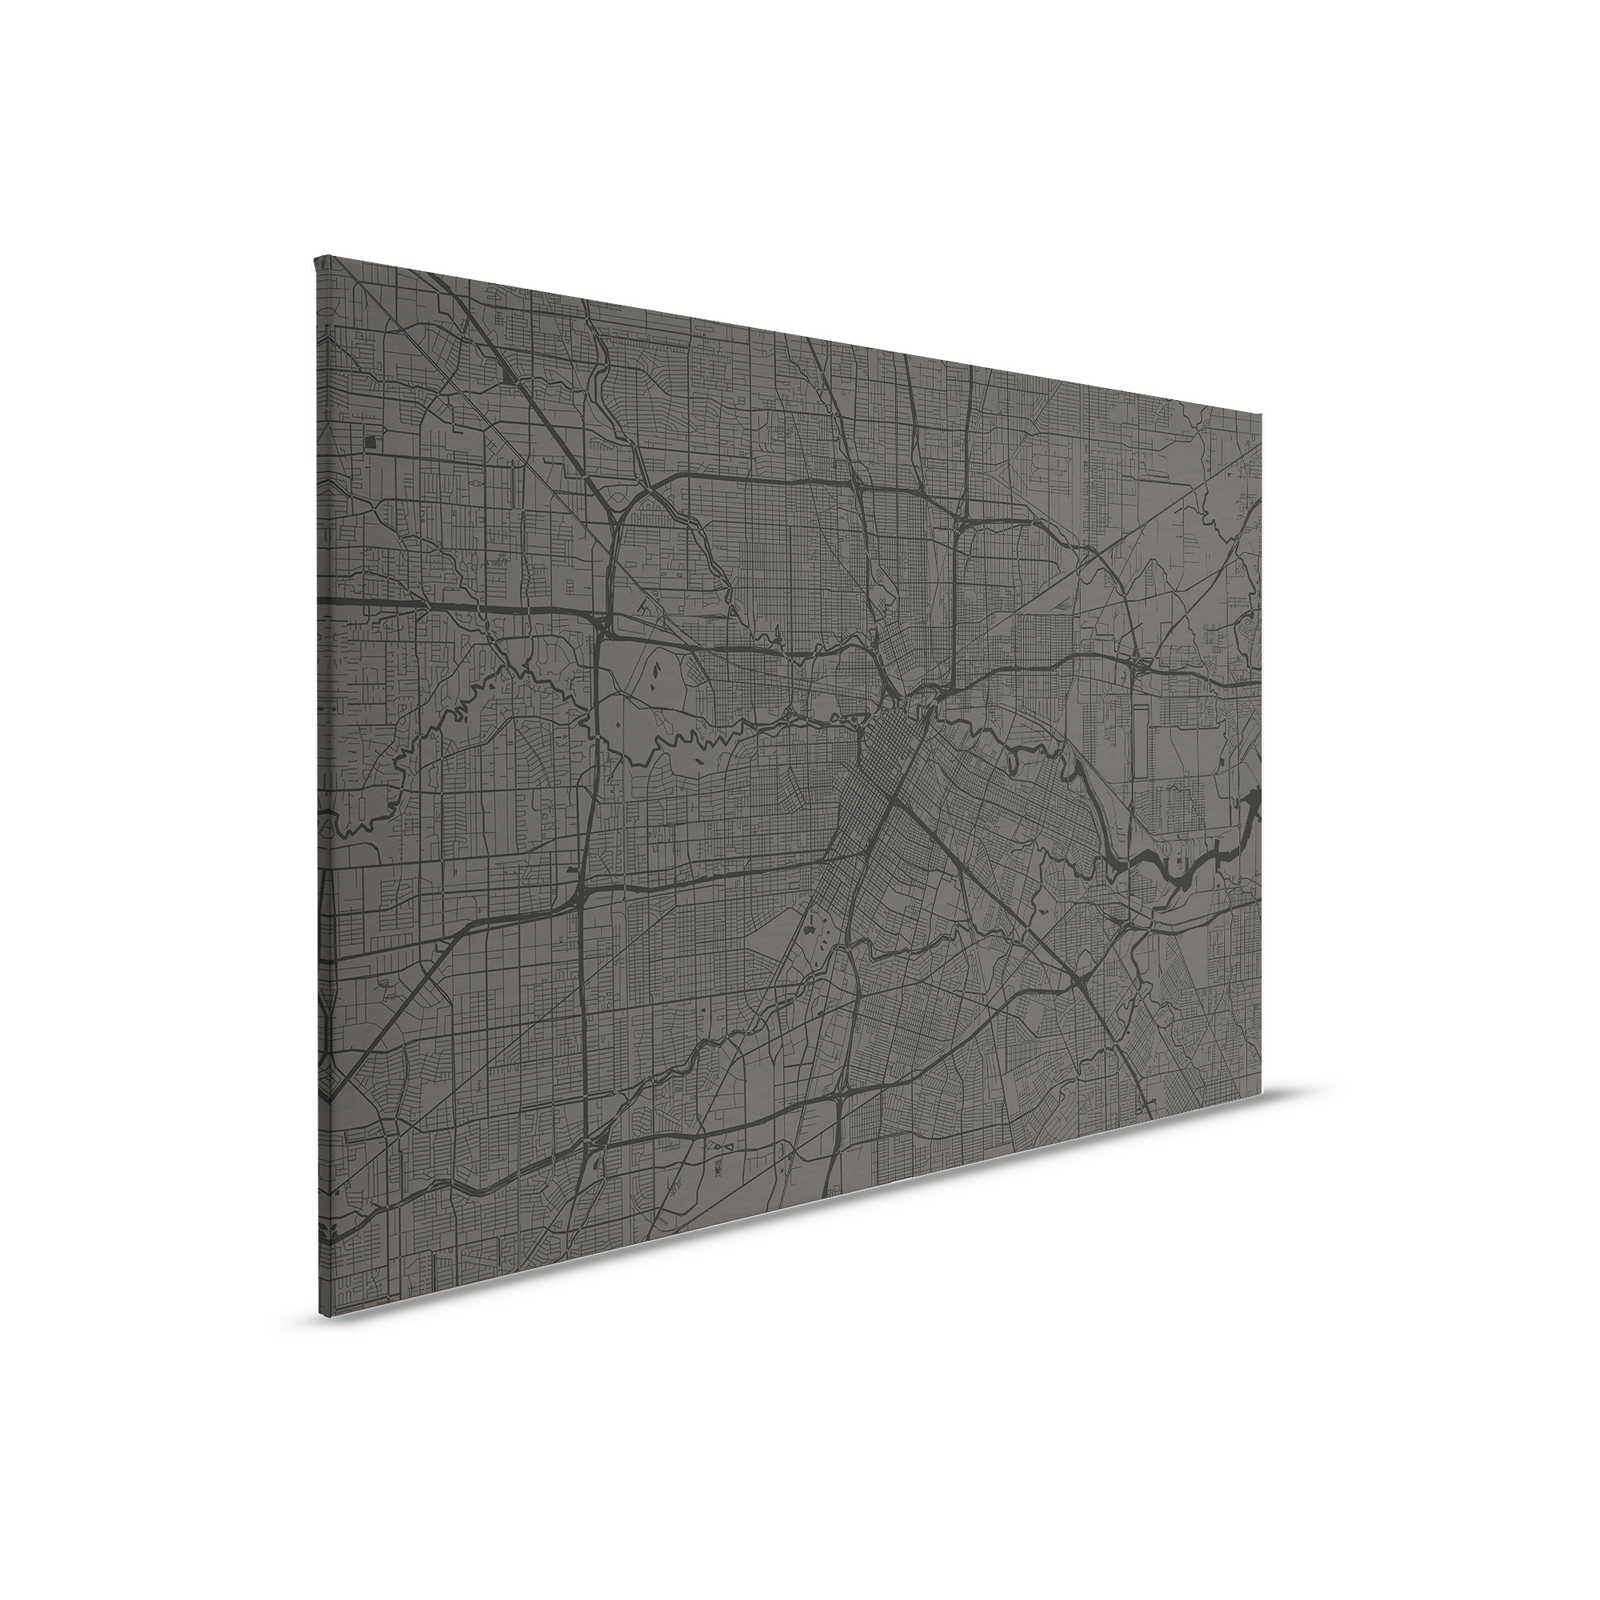         Canvas painting City Map with Street Course | black - 0,90 m x 0,60 m
    